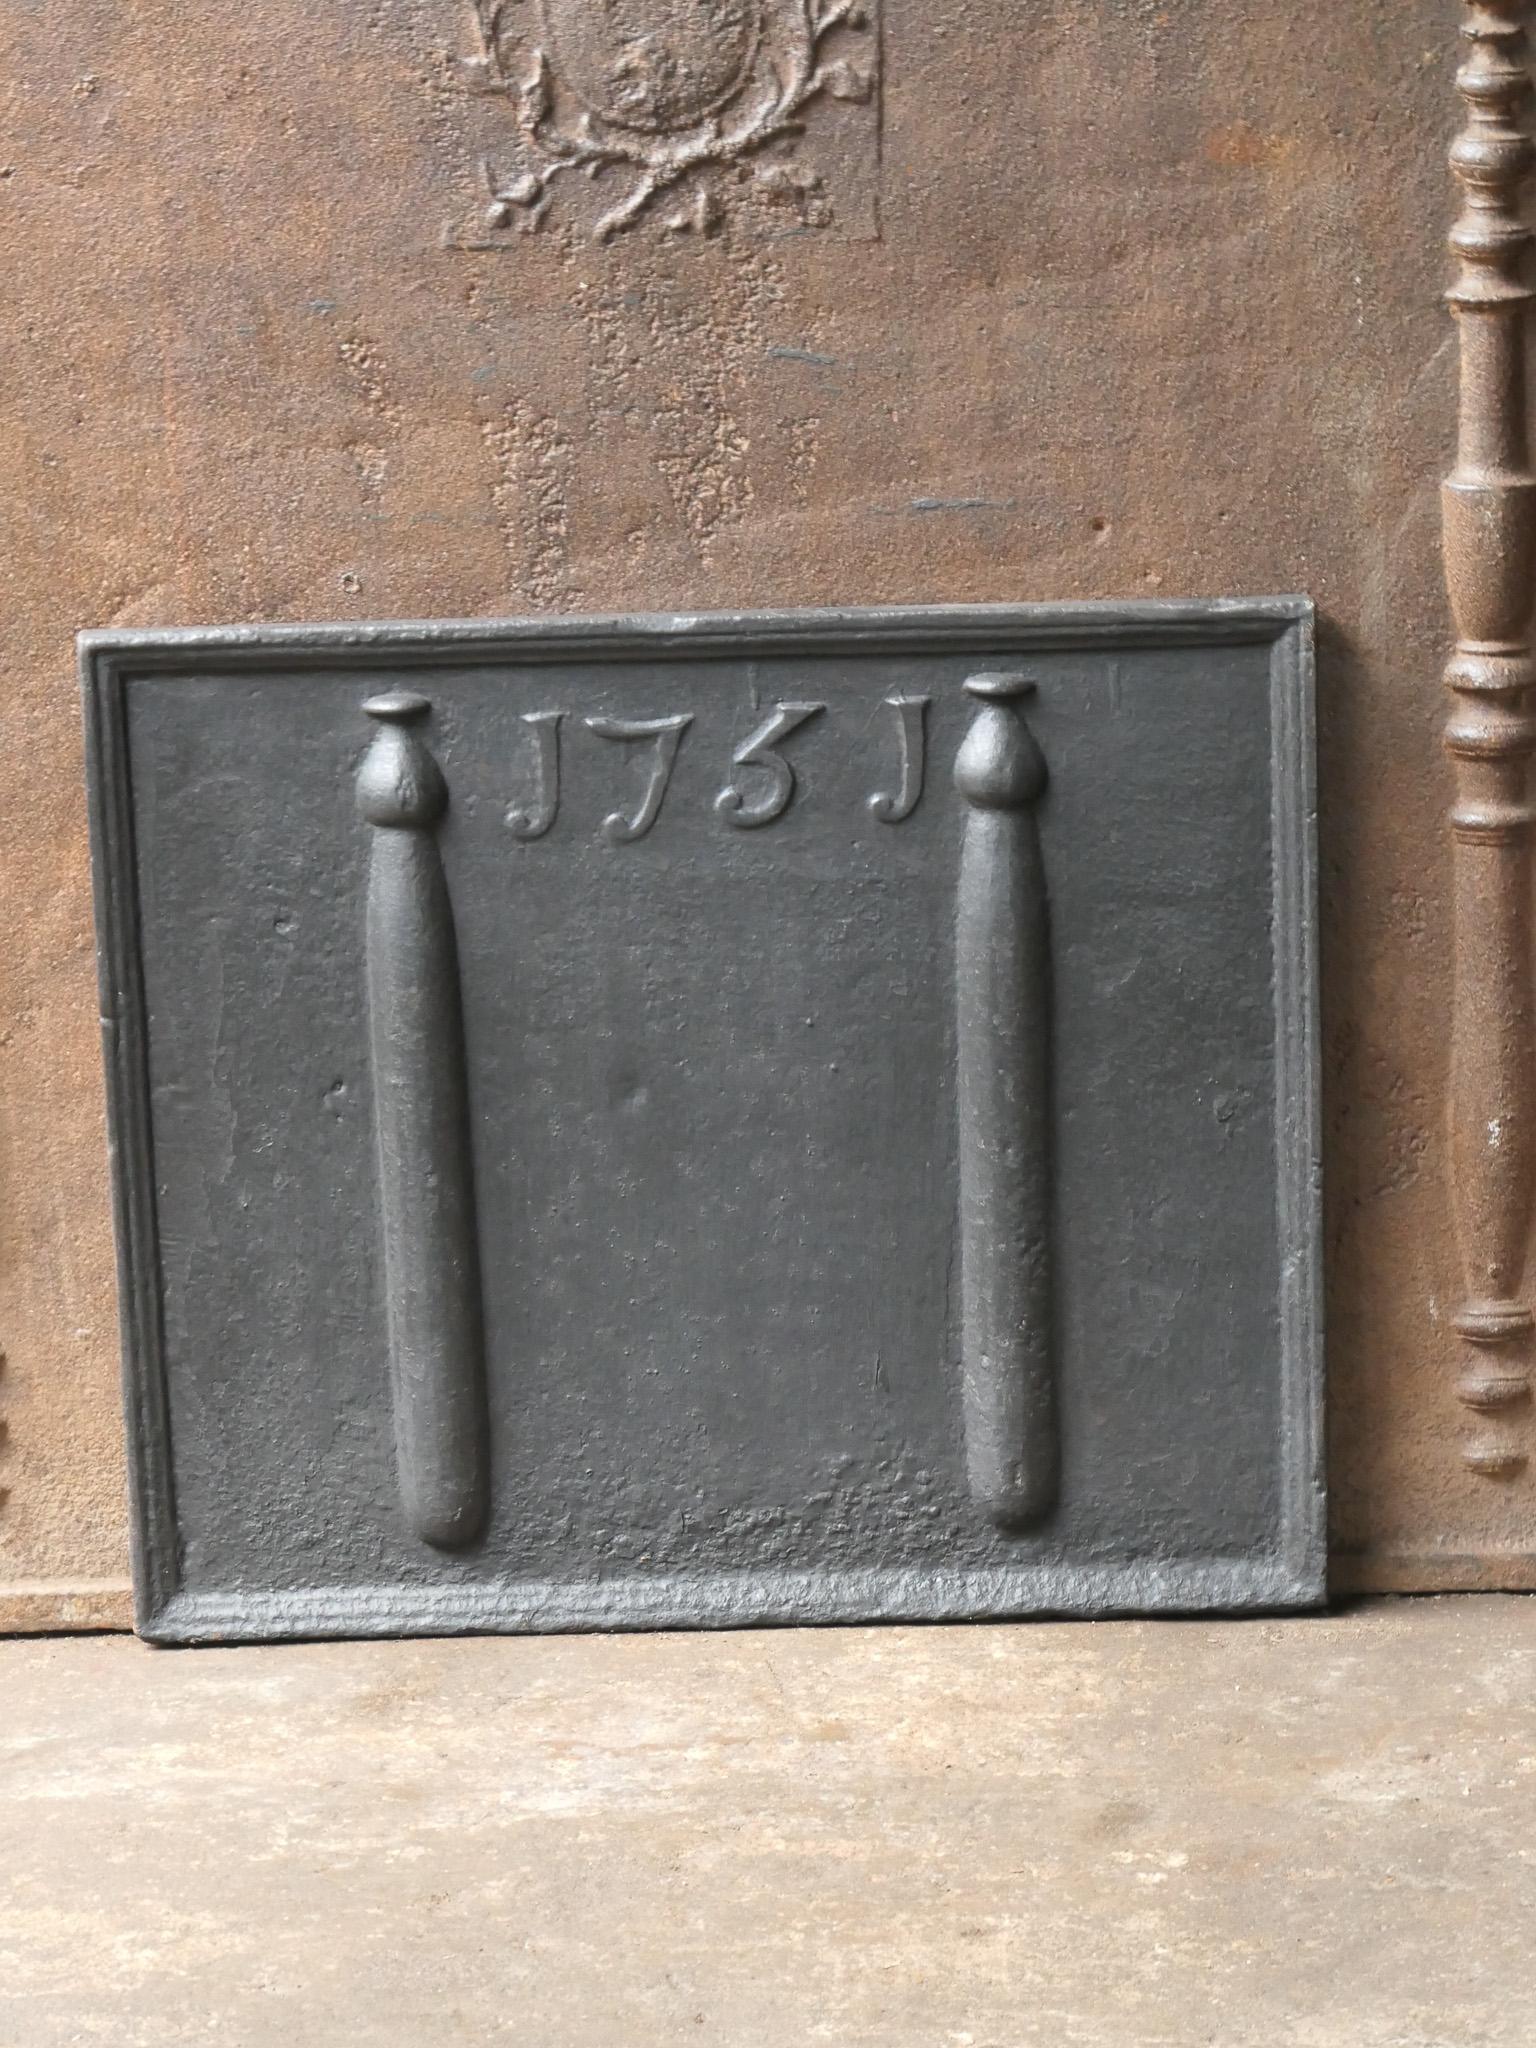 18th century French Louis XIV fireback with pillars of Hercules. The pillars stand for the club of Hercules and symbolize strength and the unknown. The date of production, 1751, is also cast in the fireback. 

The fireback has a black / pewter